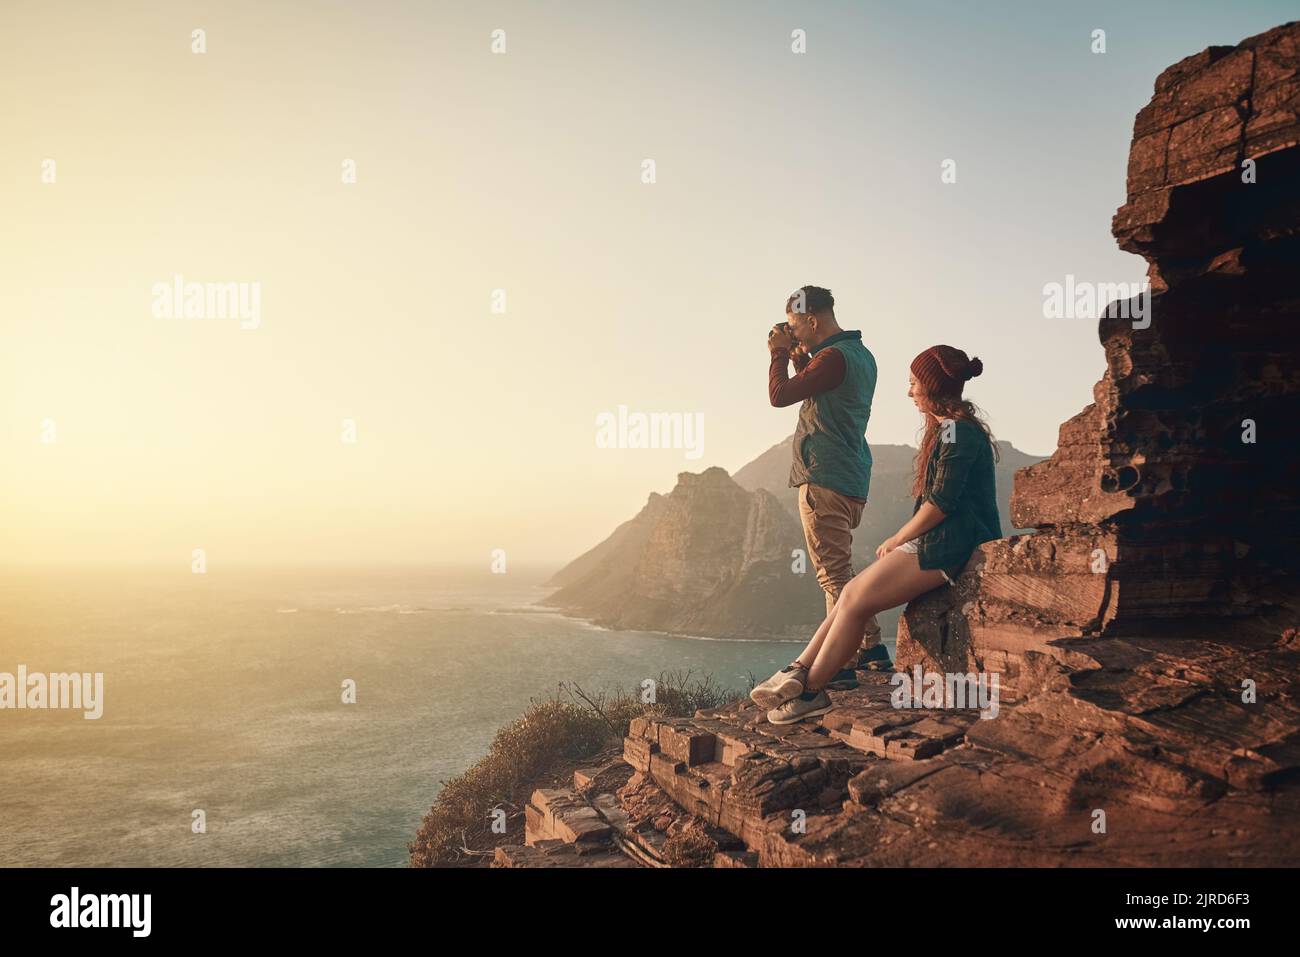 Some views demand a photograph. Full length shot of a young man taking picture of the view while hiking with his girlfriend. Stock Photo